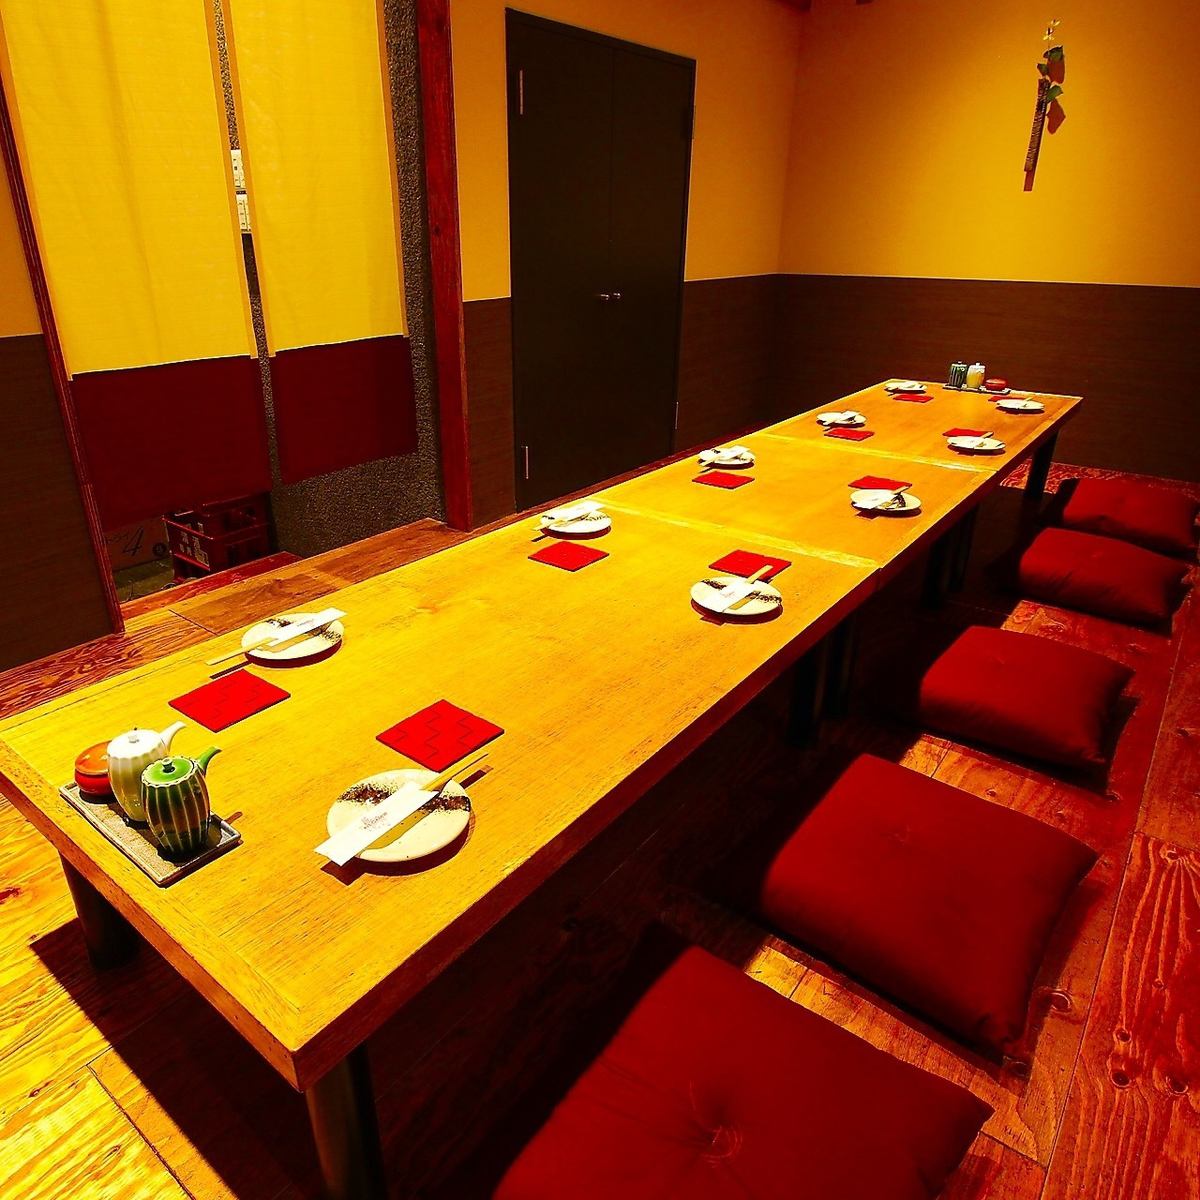 The stylish interior is recommended for any occasion, such as dates and girls-only gatherings.